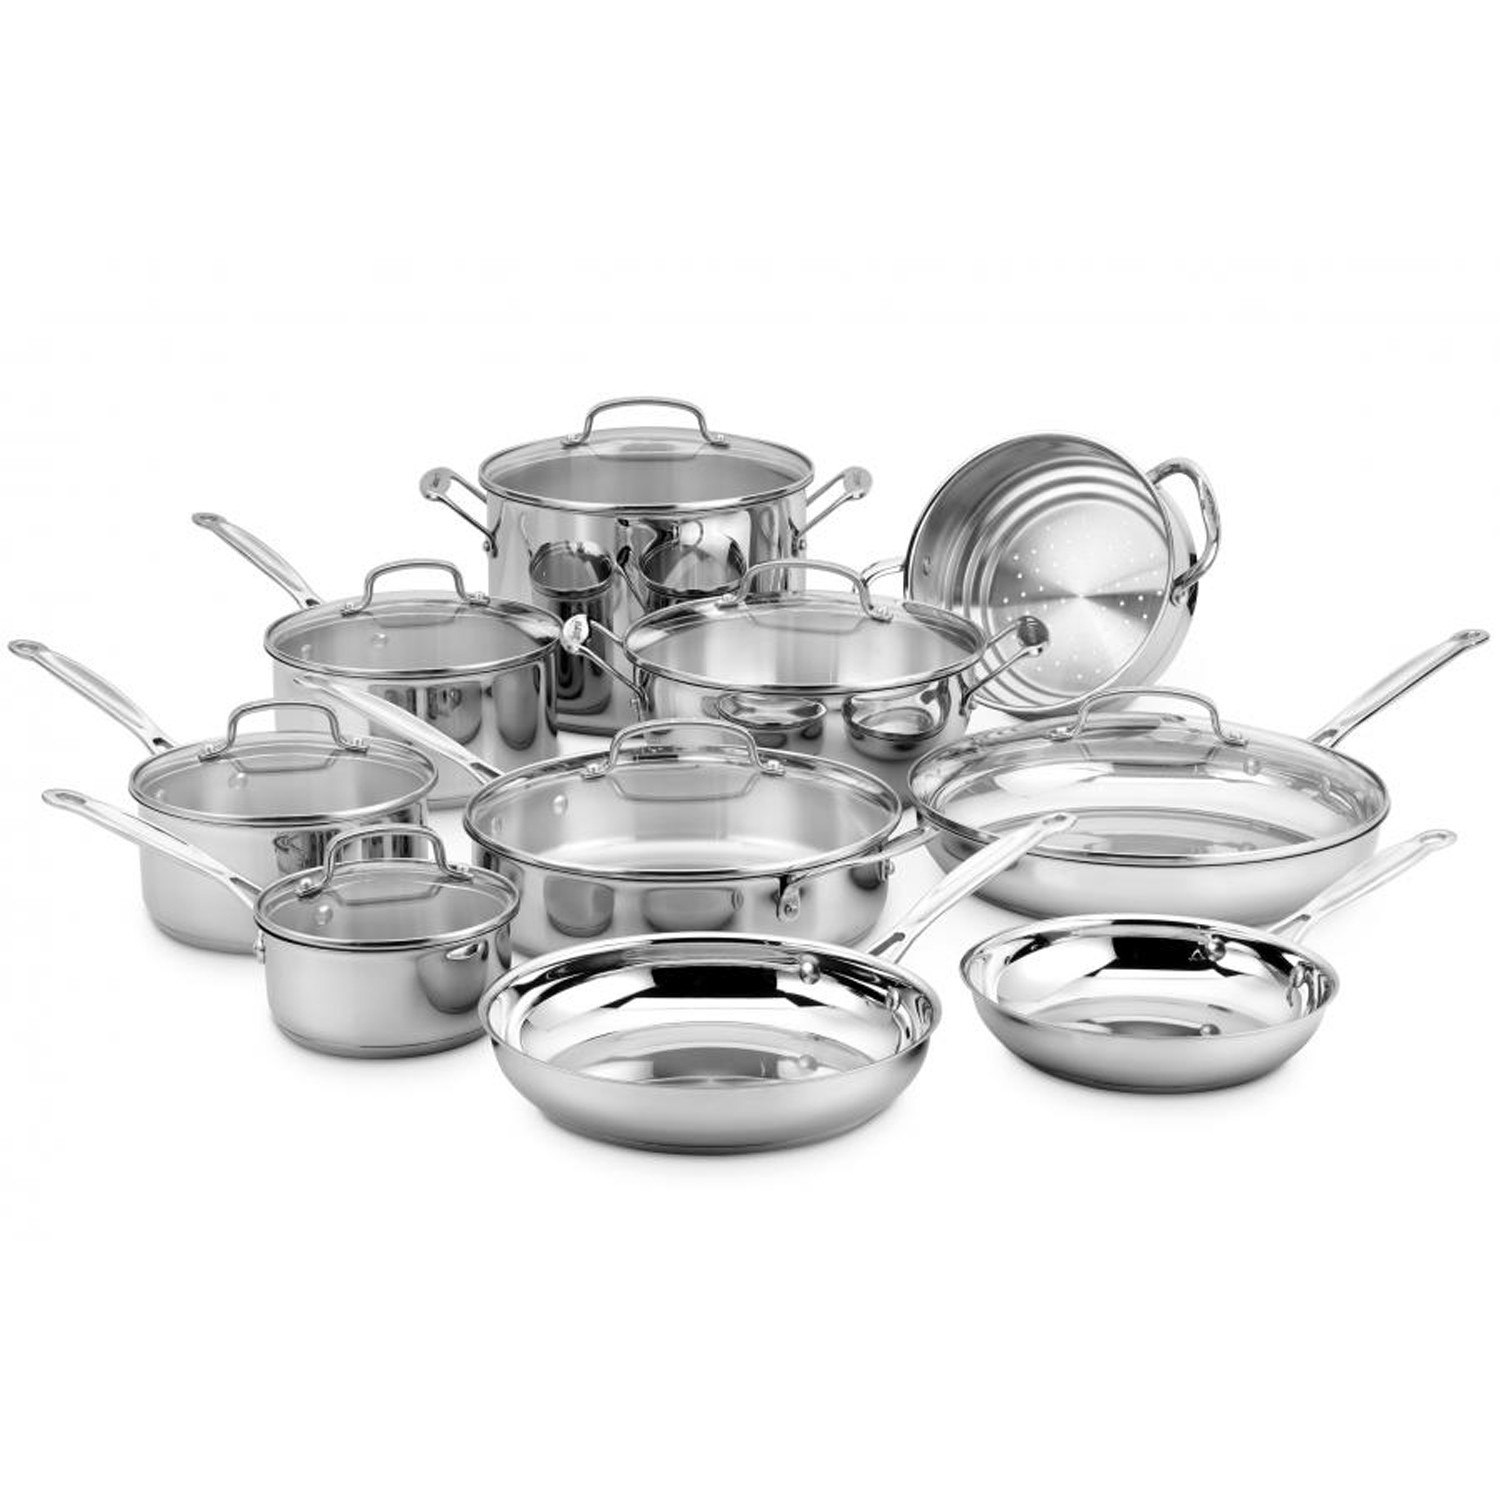 Chef's Classic Stainless Cookware Set // 17 Piece Set - Cuisinart ...